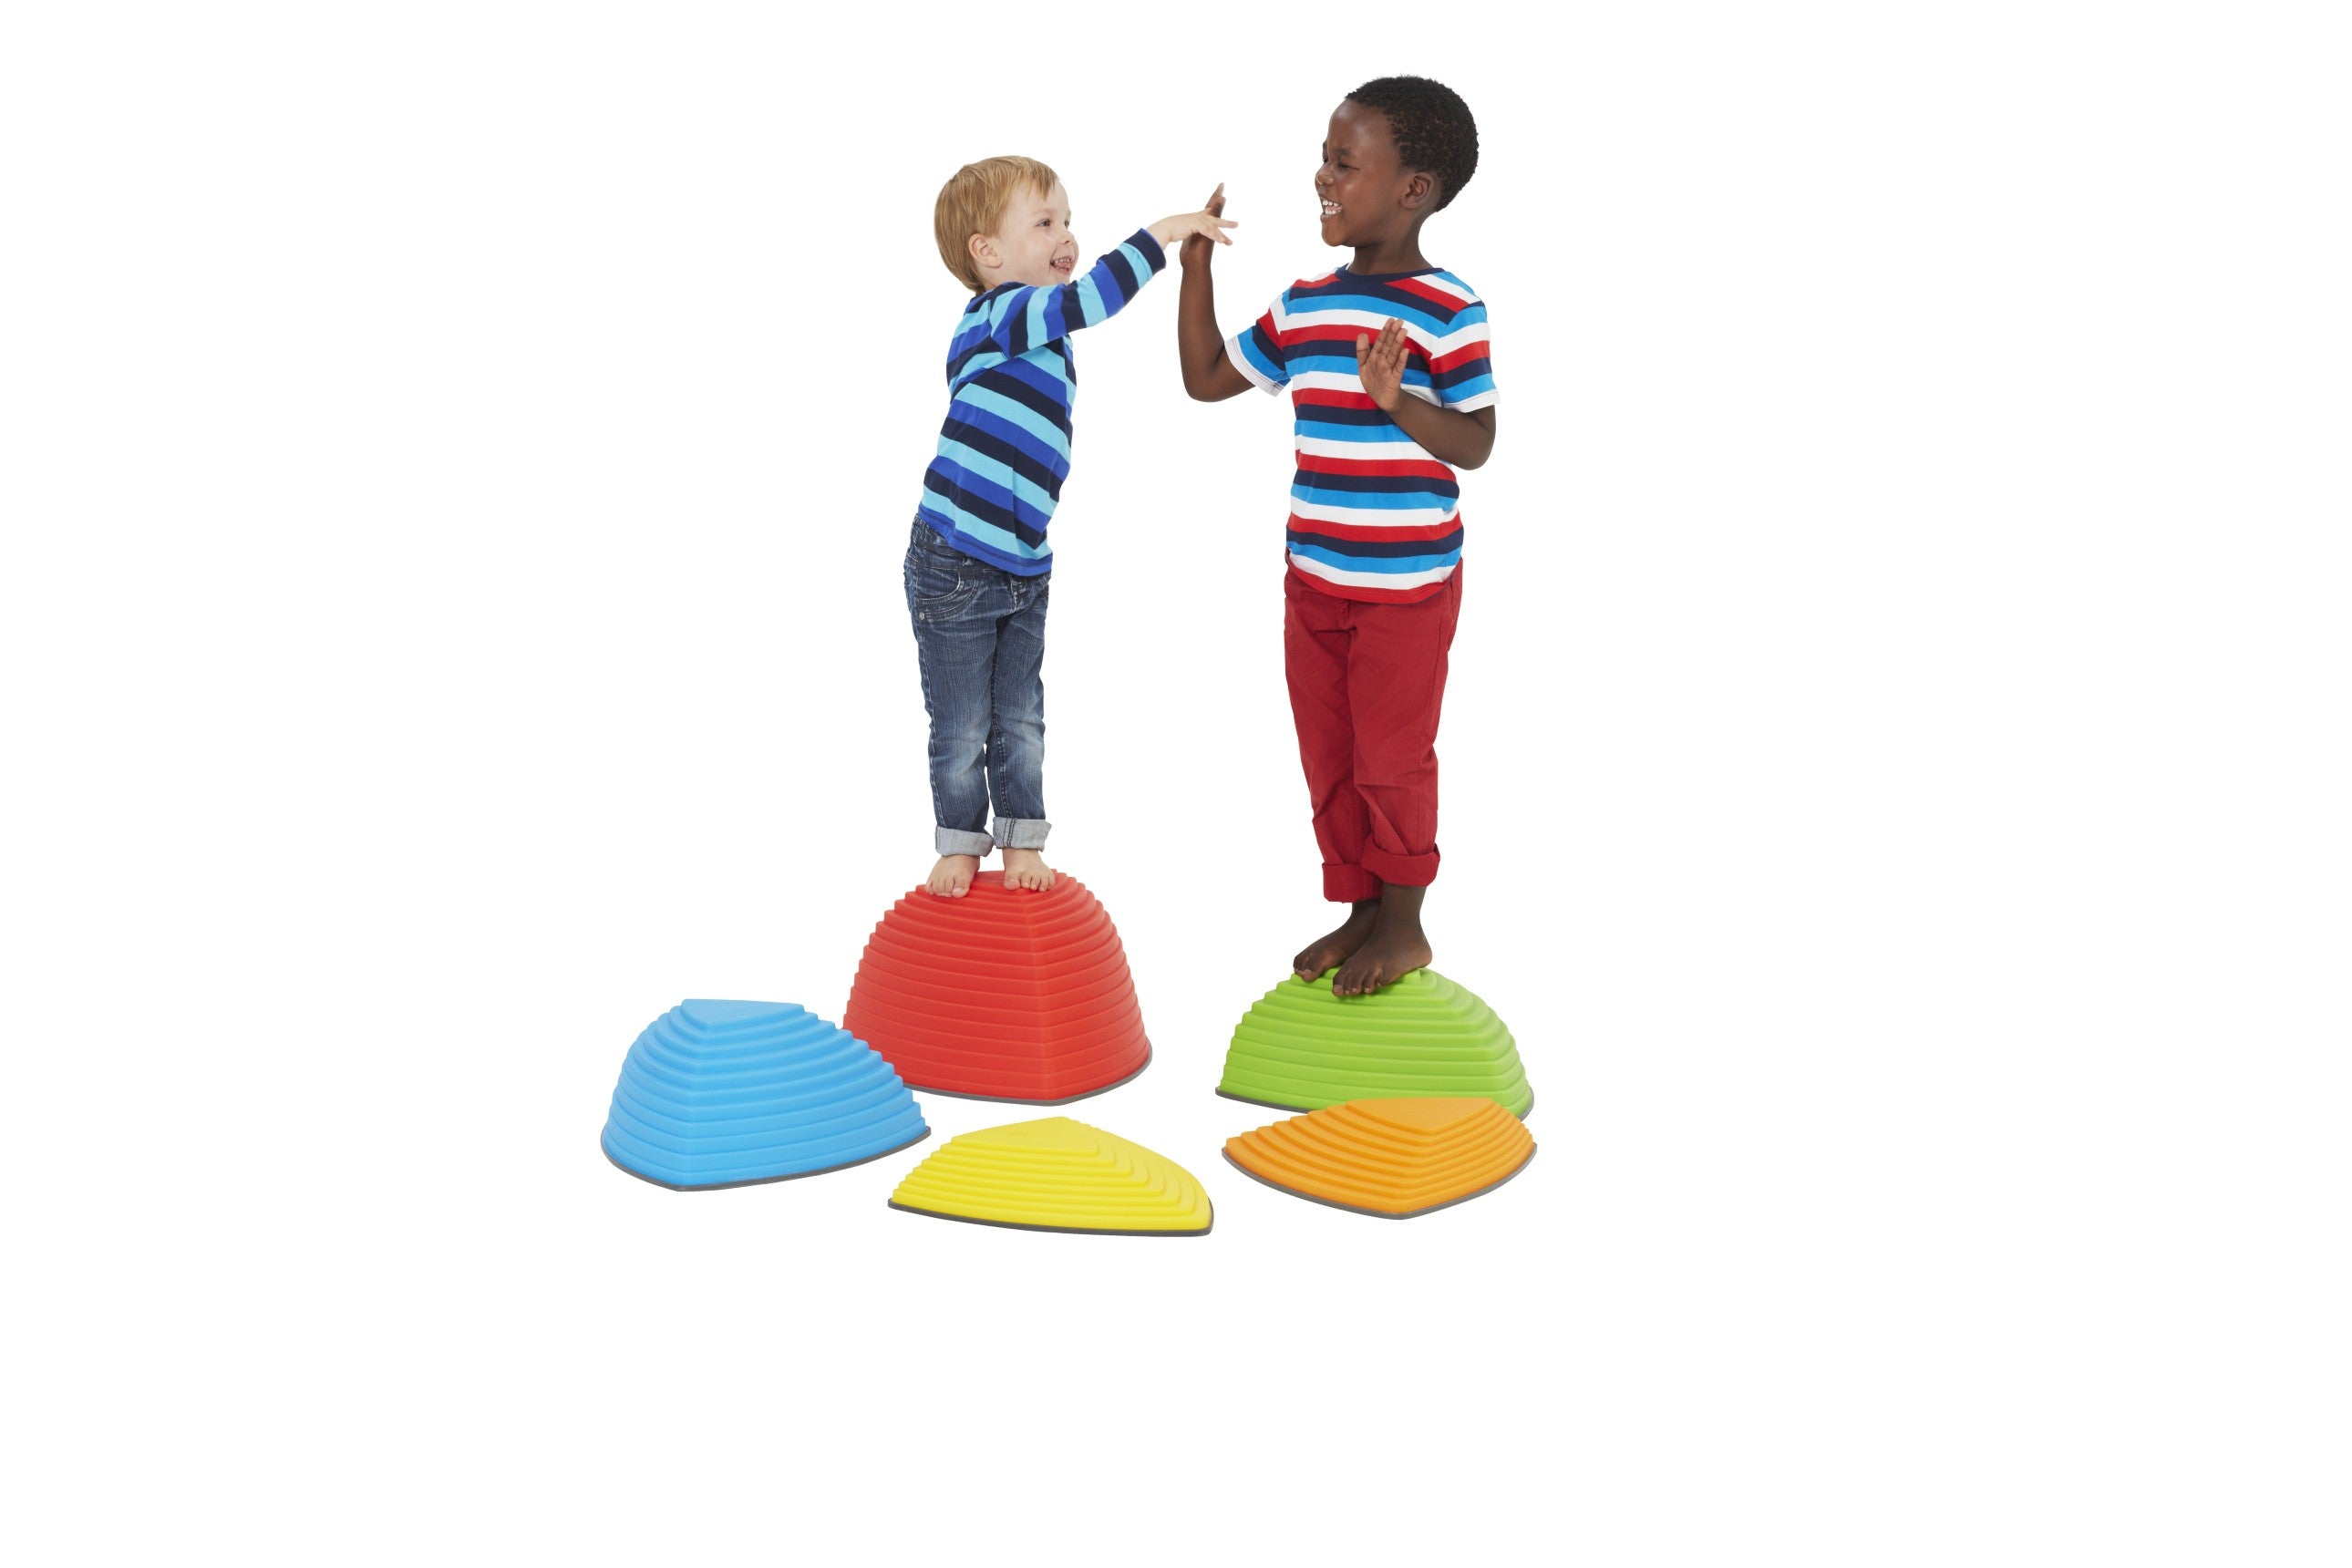 Gross Motor Tool: Gonge Hilltops are a great way to get your kids moving during COVID.